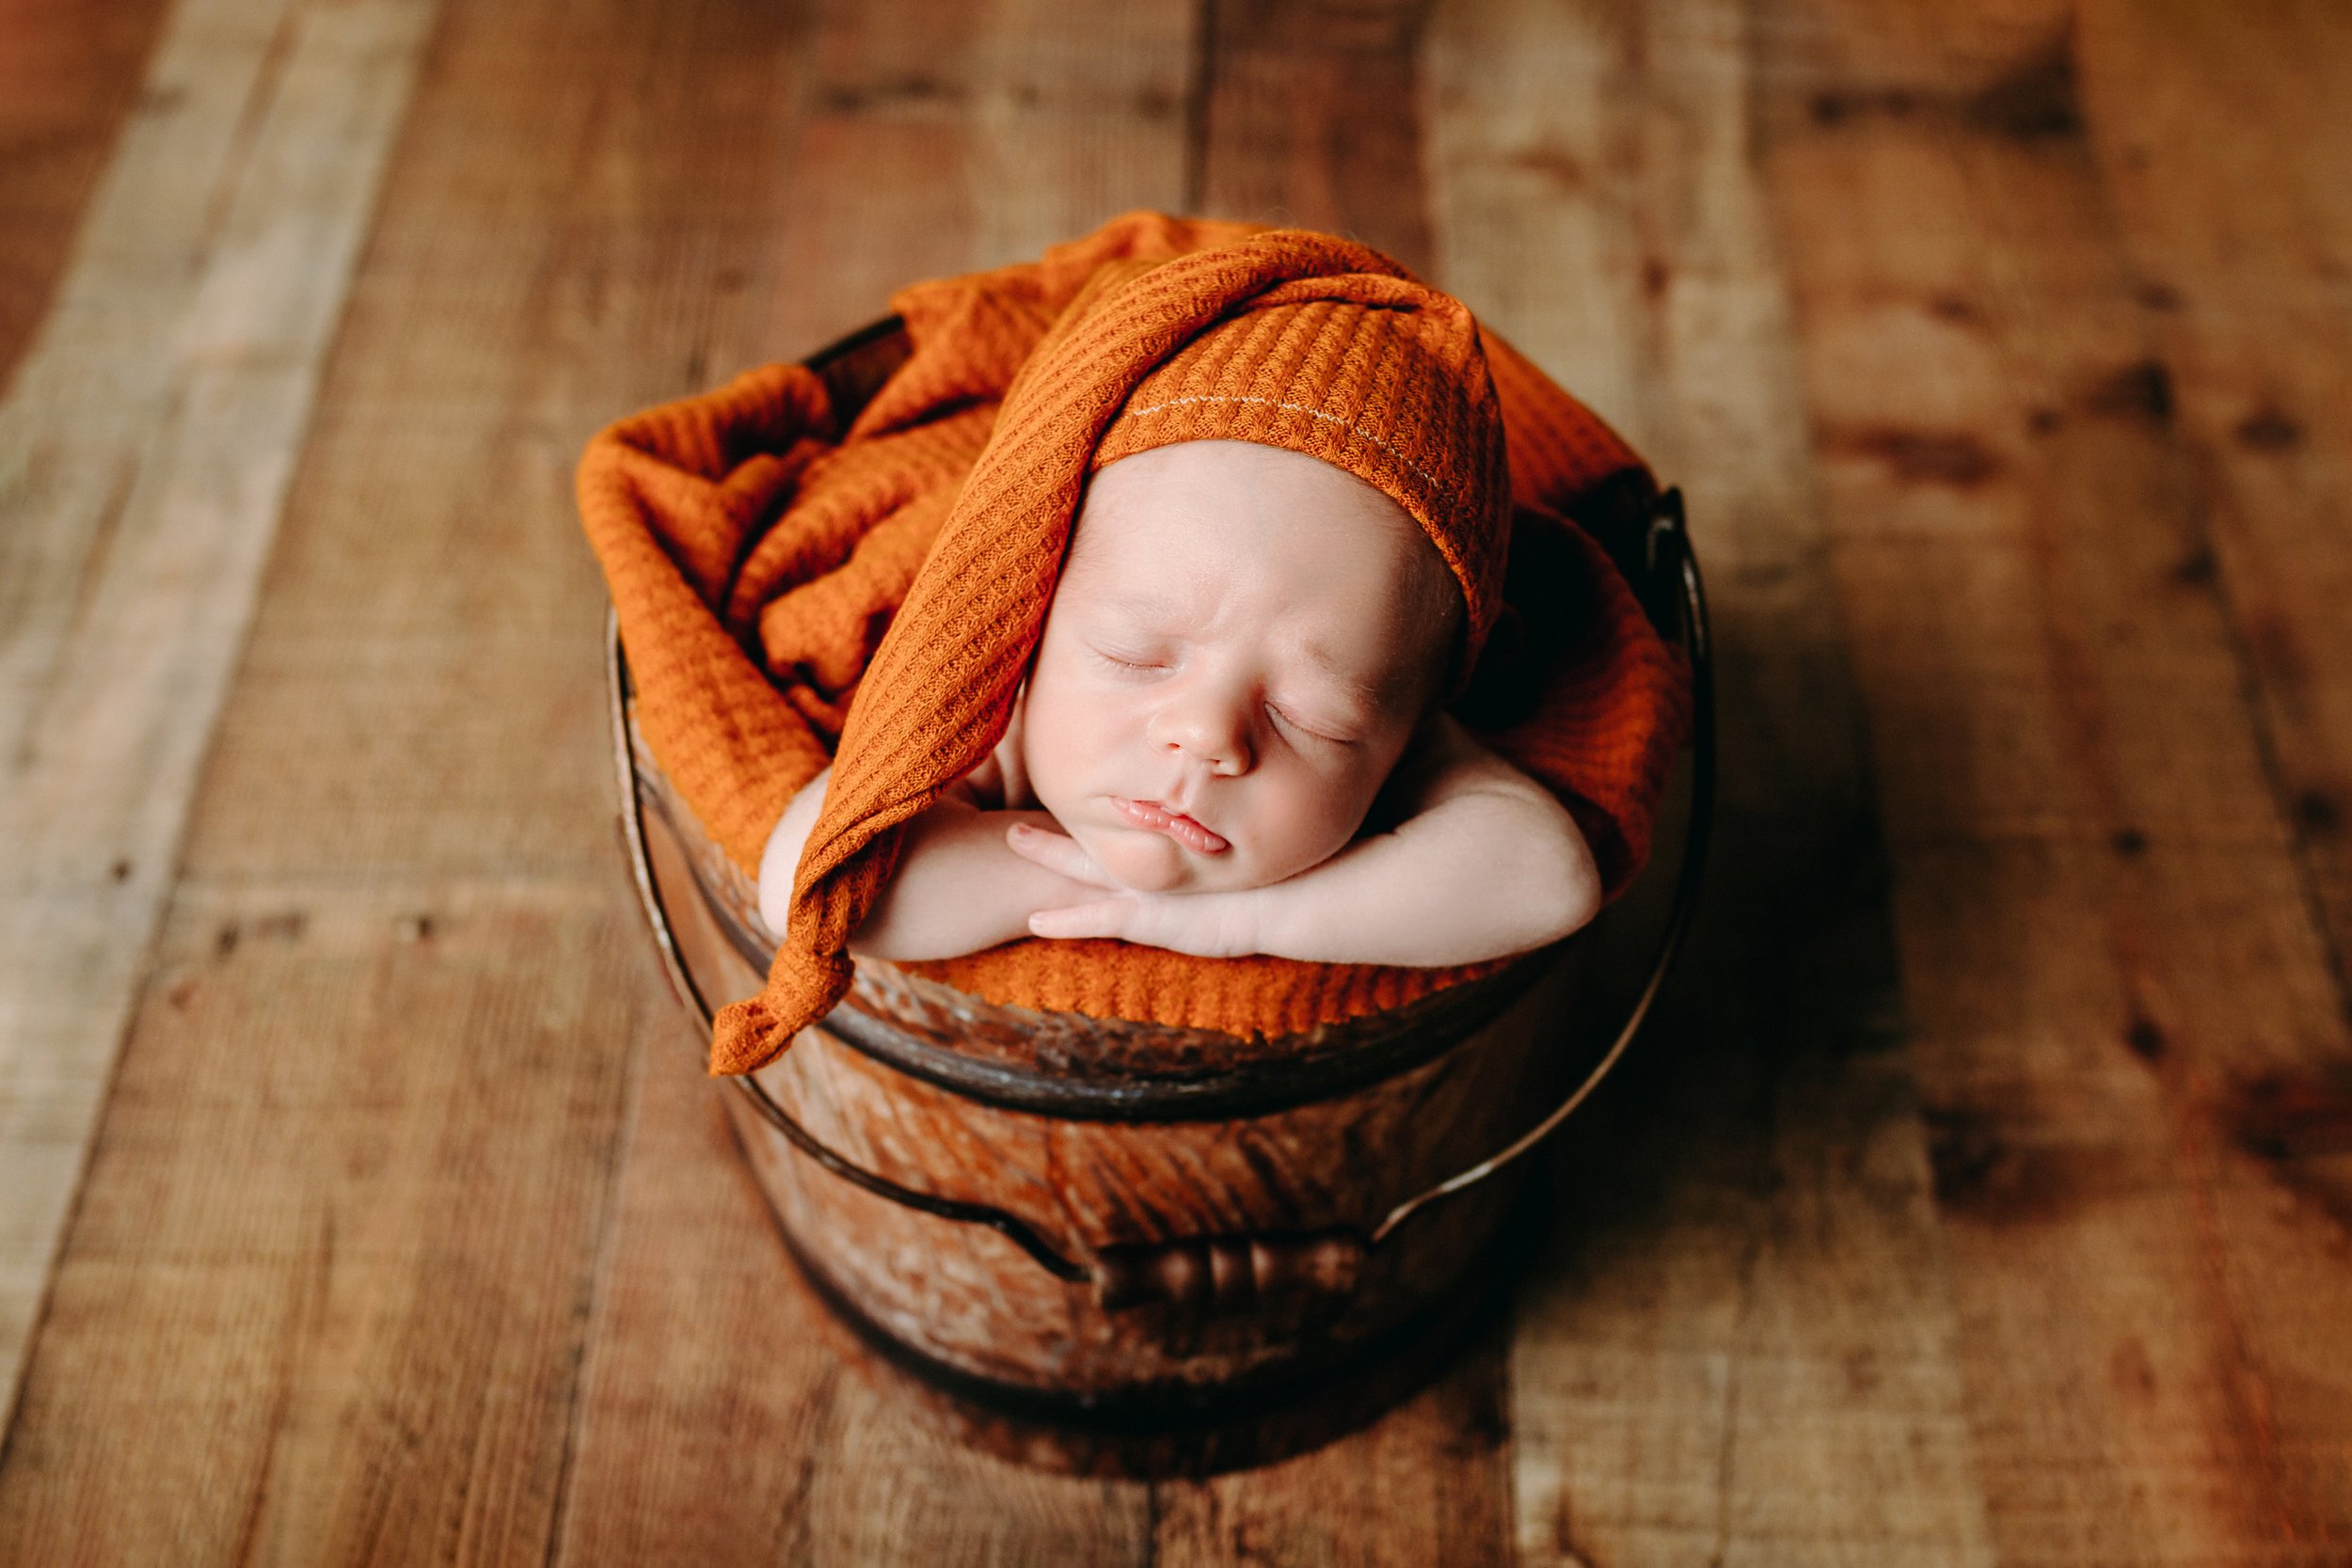 10 Best Newborn Poses to Try (To Maximise Cuteness)